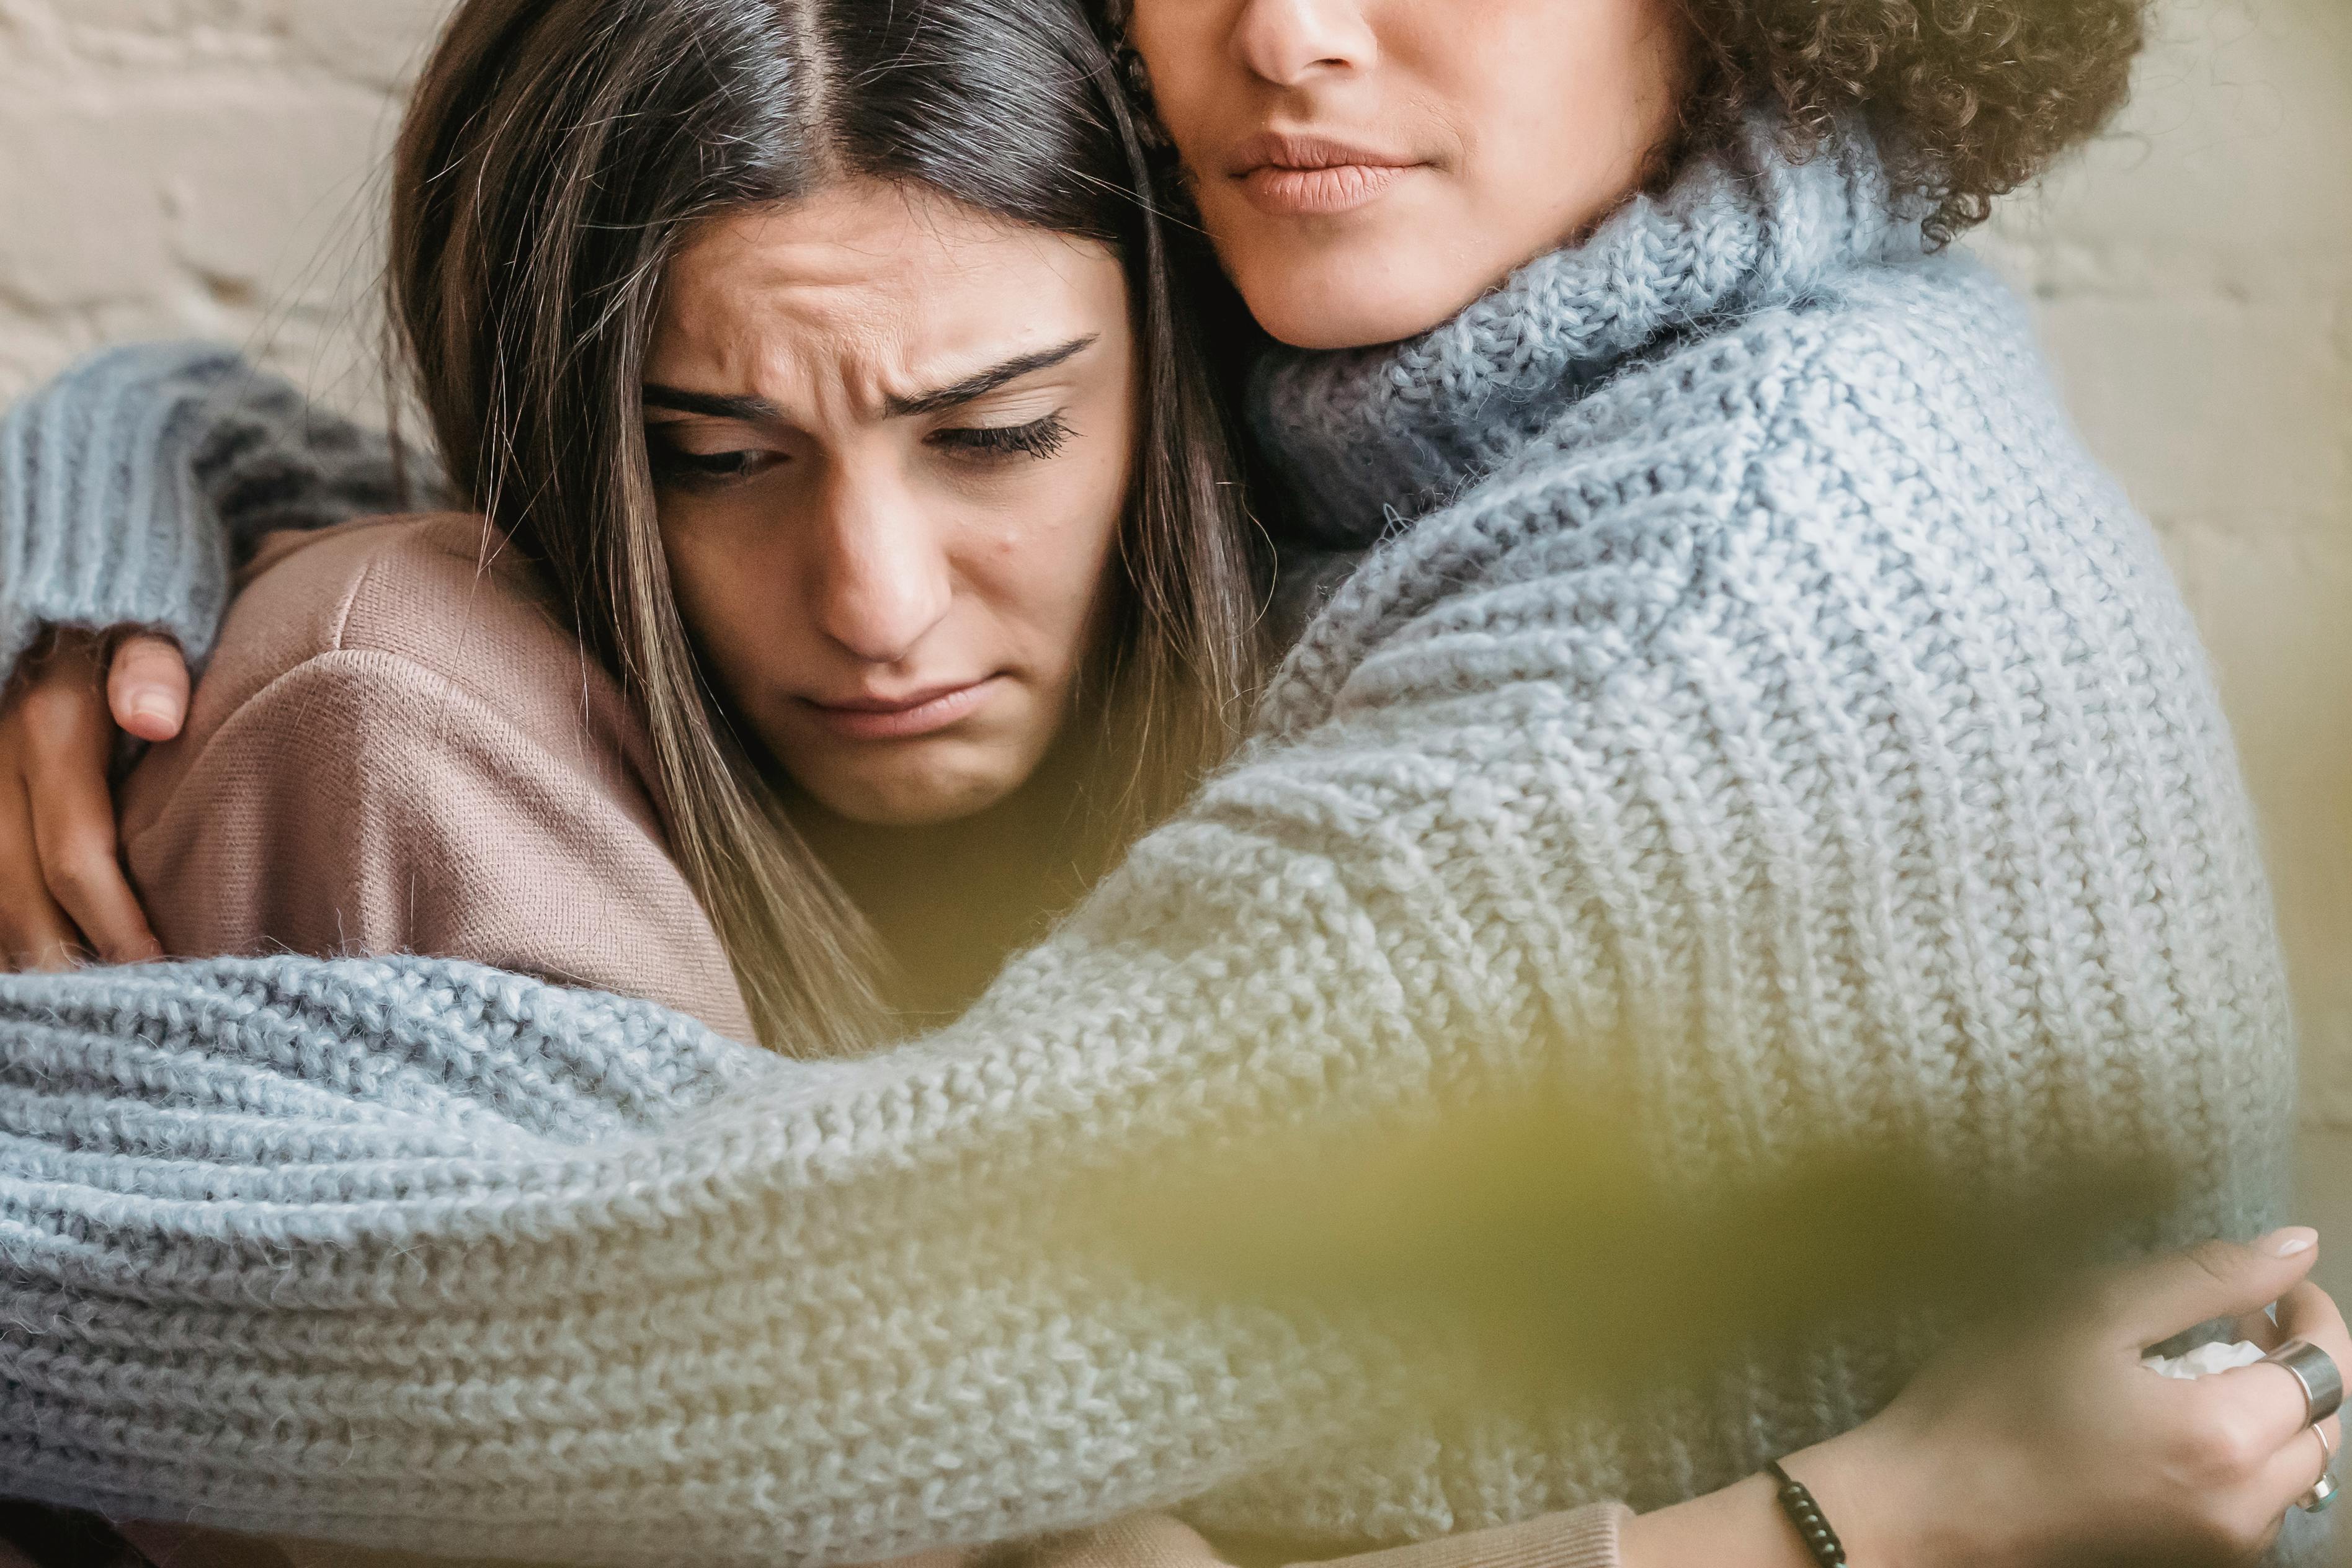 An upset woman being comforted by a friend | Source: Pexels